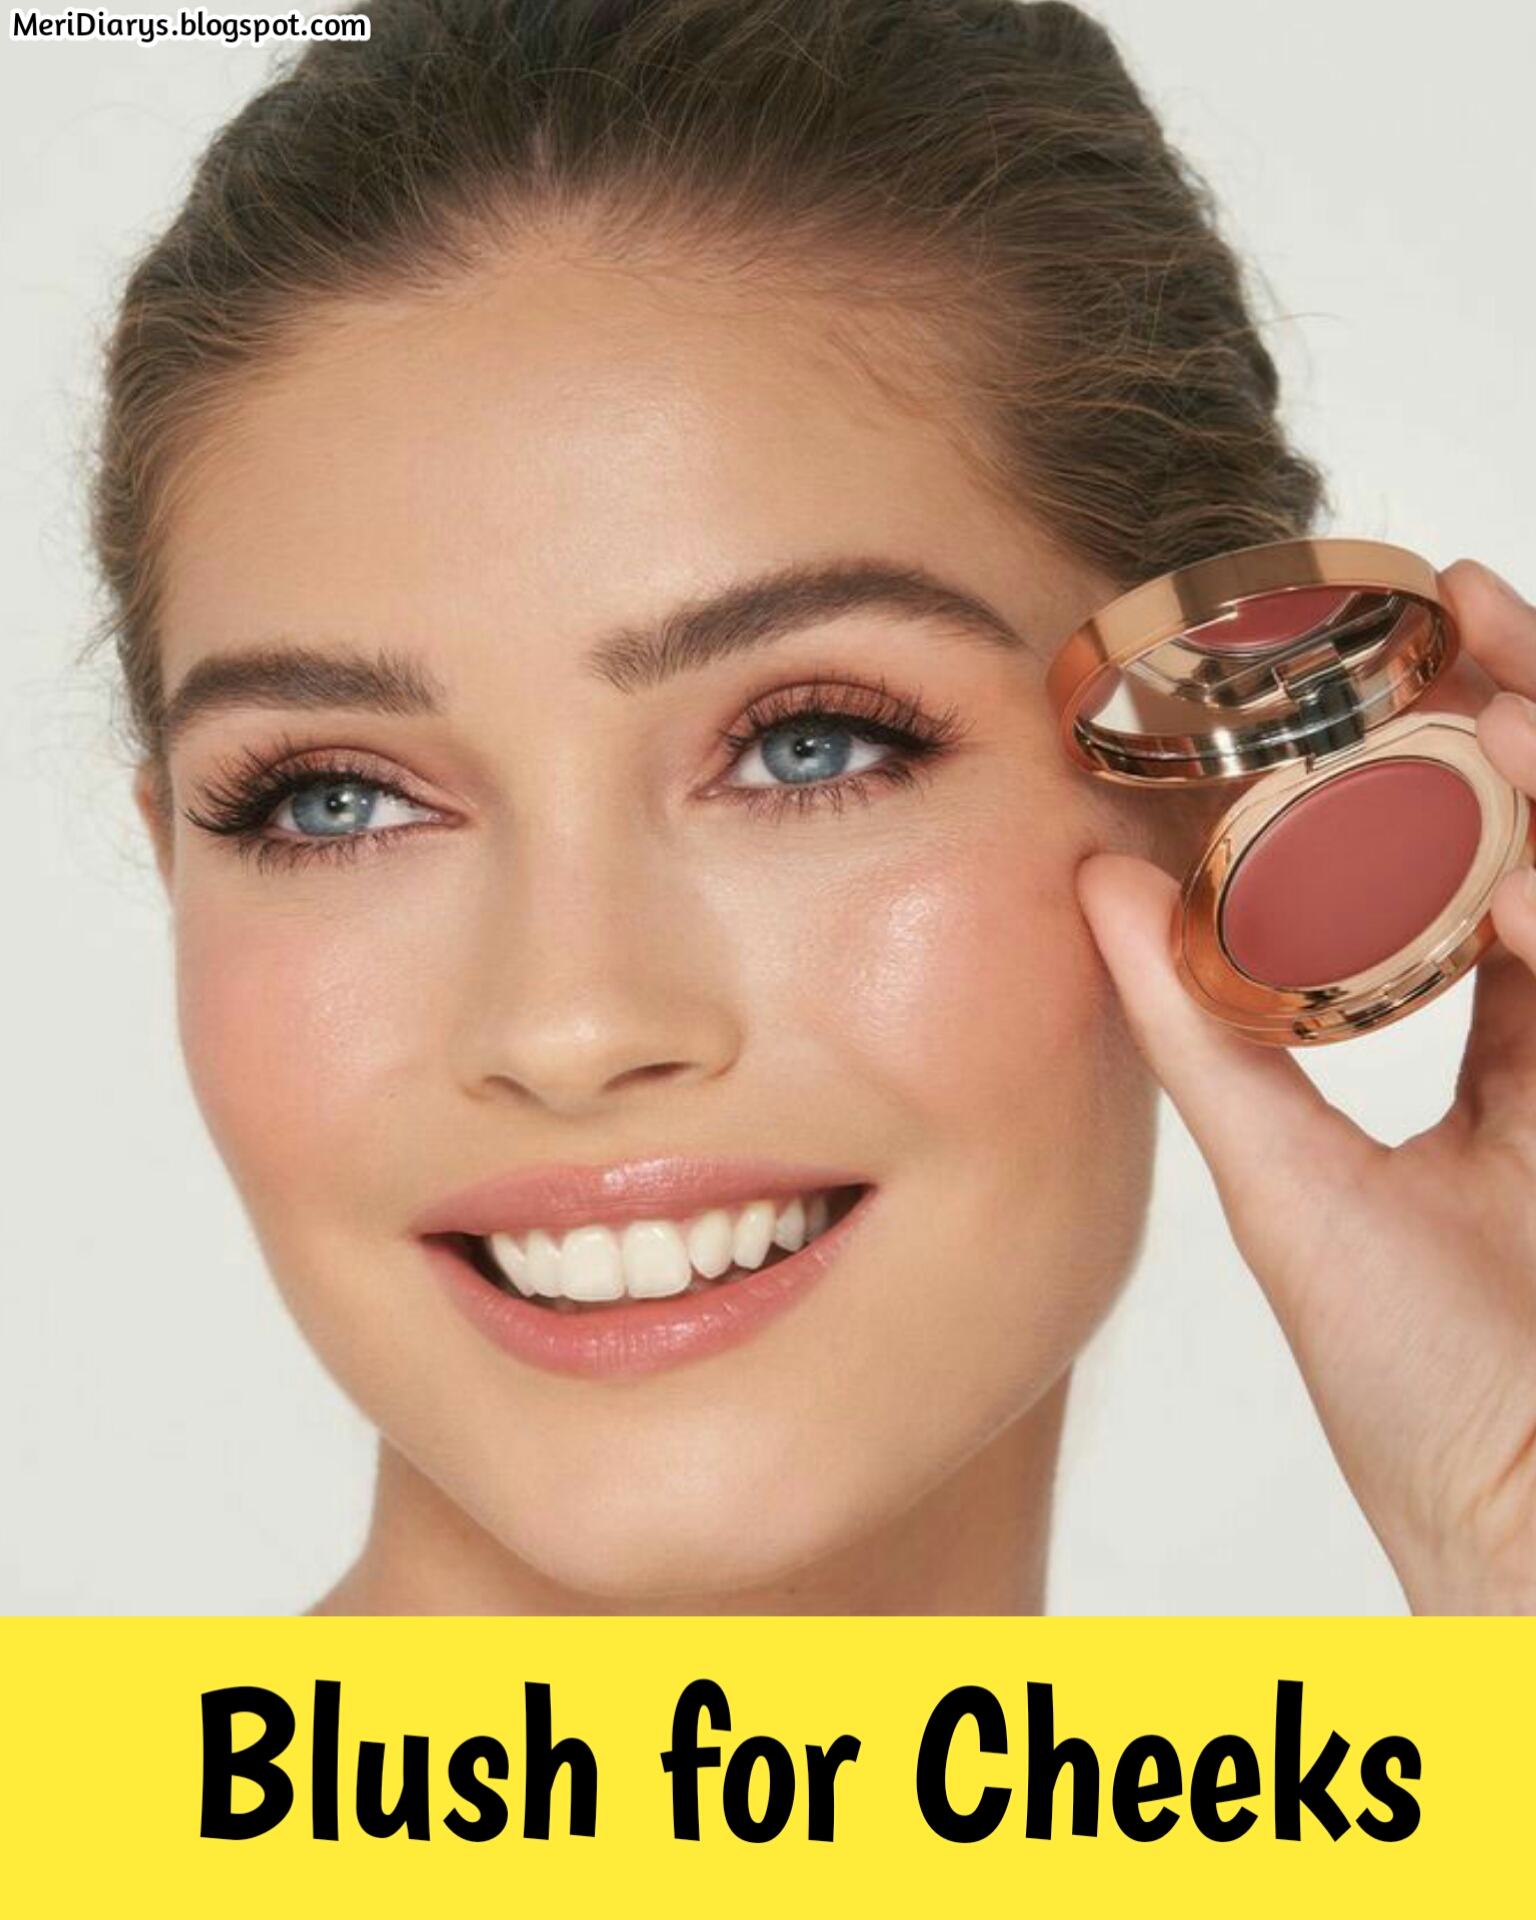 Blush for Cheeks | Making Your Cheeks Look Good